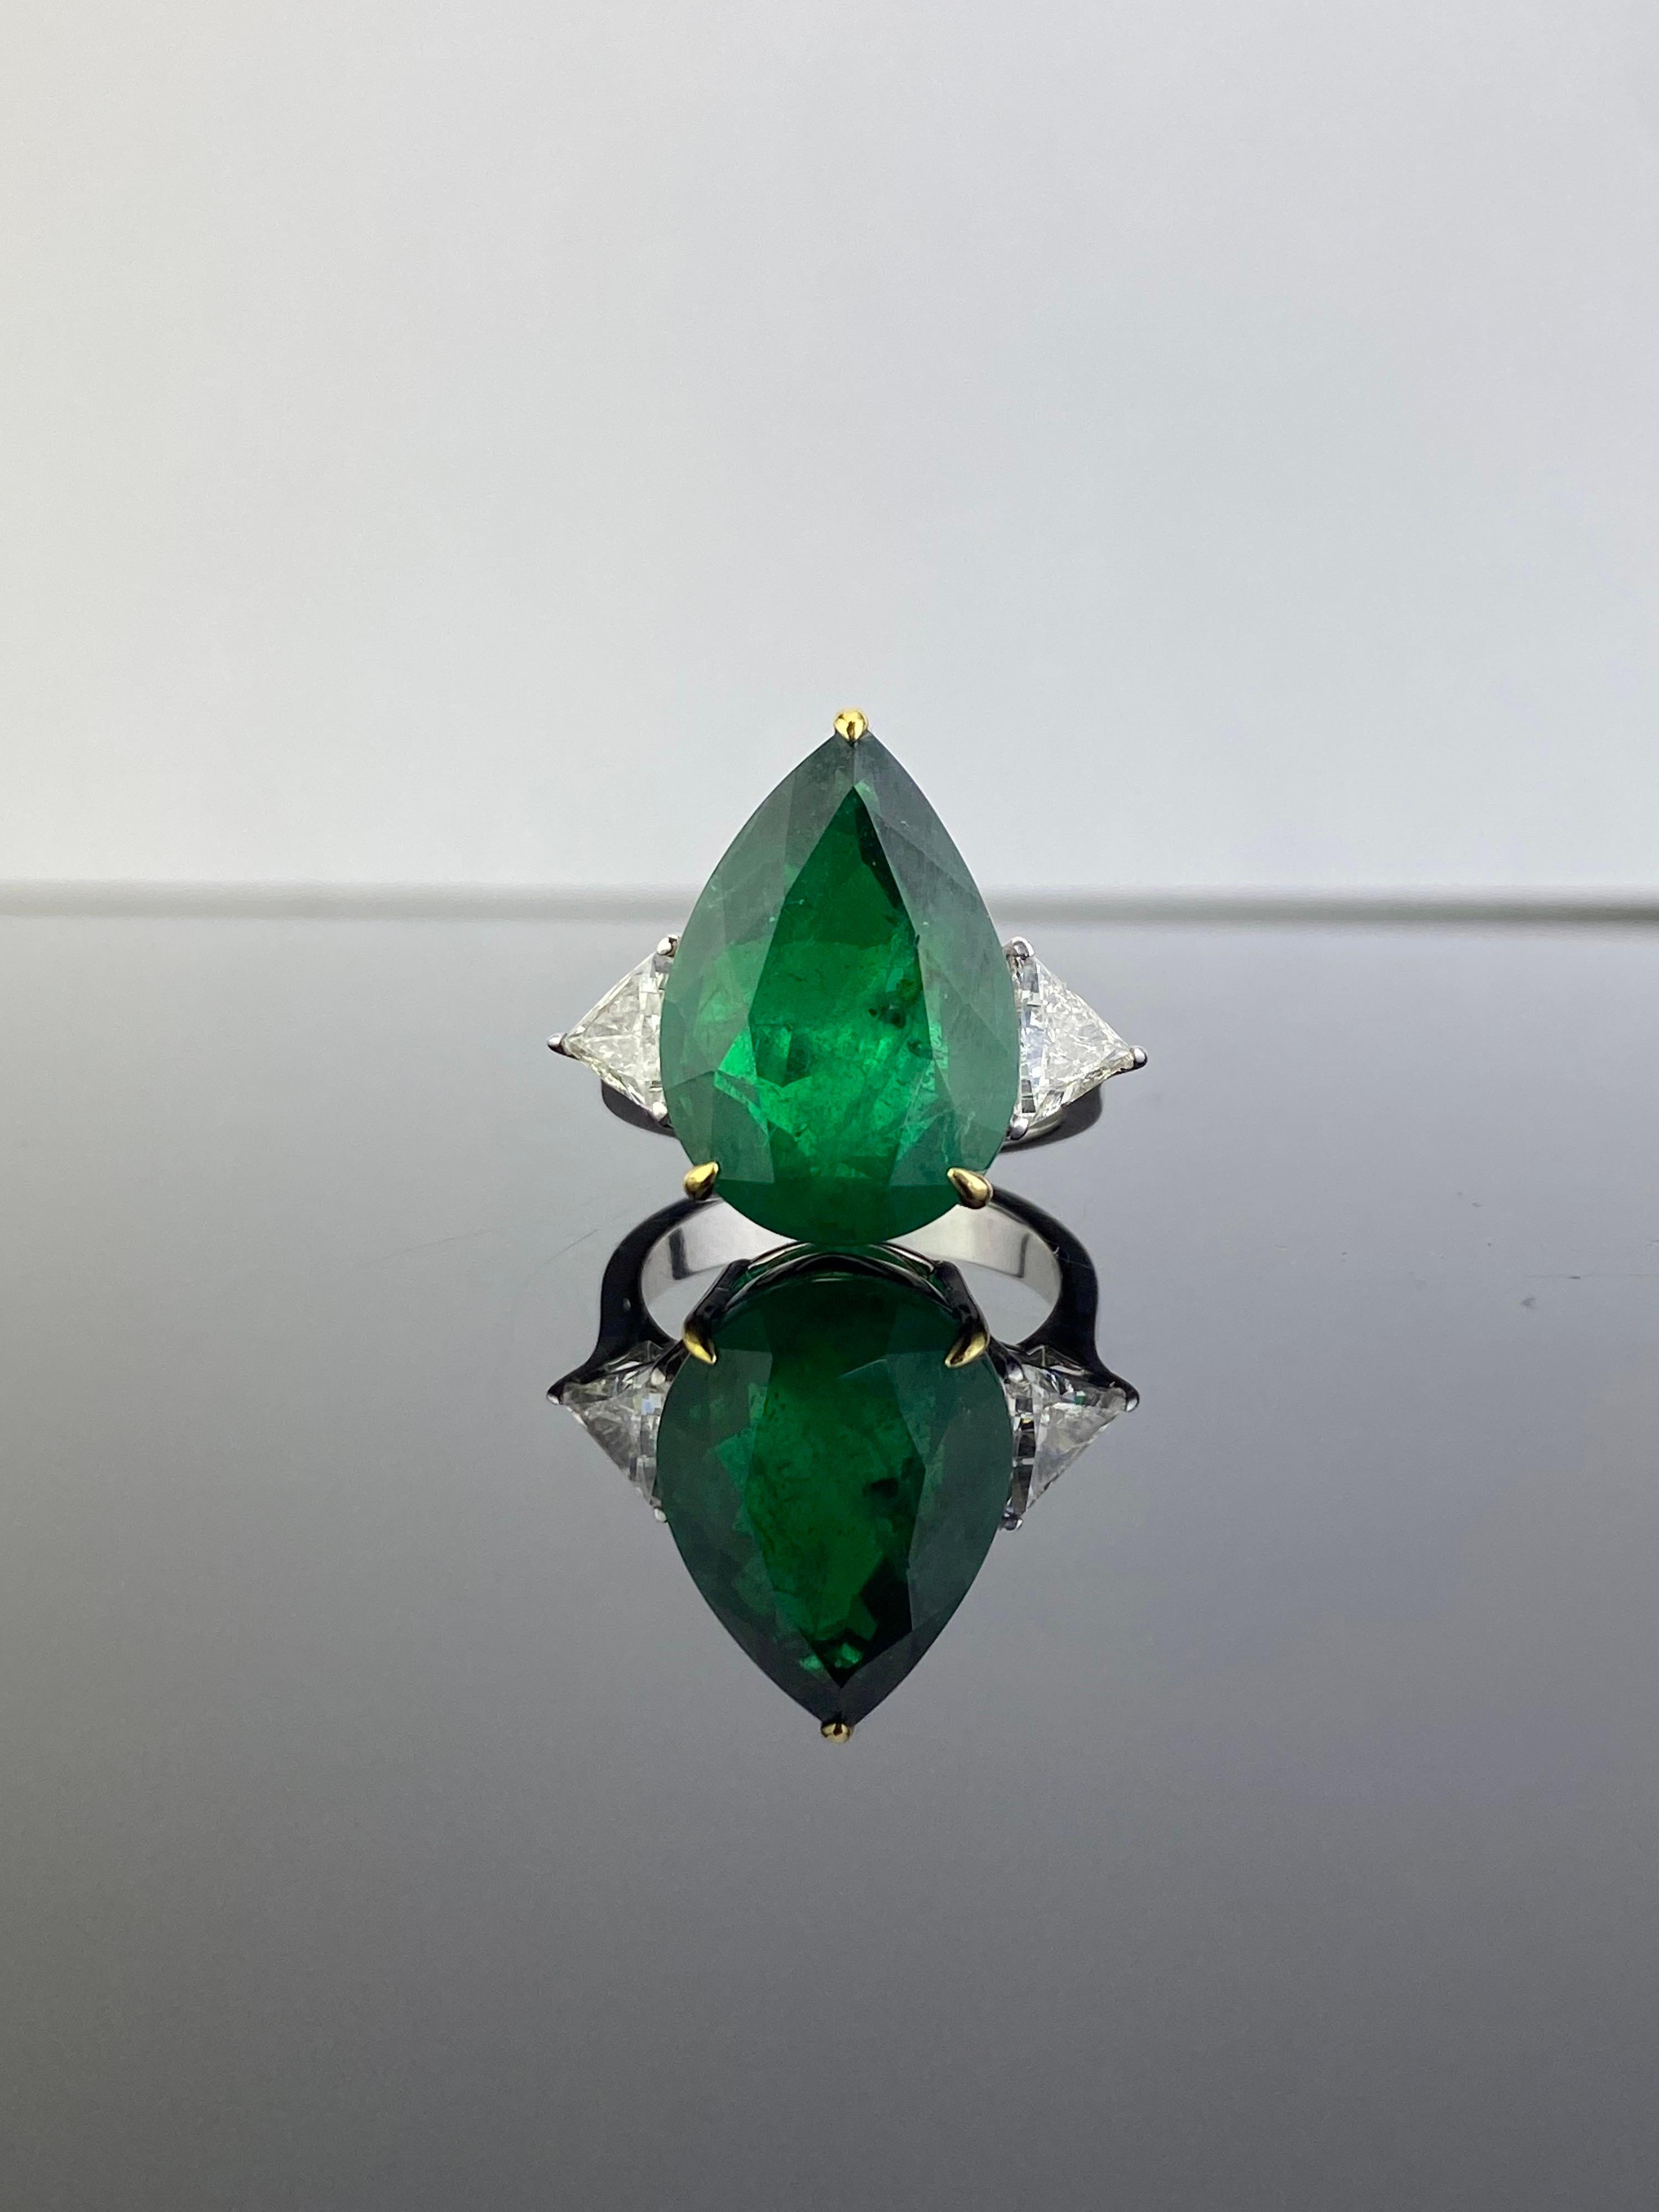 A gorgeous, Emerald and Diamond three-stone engagement ring. With a 10.97 carat pear shape Emerald in the centre, with 2 pieces 1.01 carat trillion shape White Diamonds on the side. The Emerald is of Zambian origin, with a beautiful vivid green